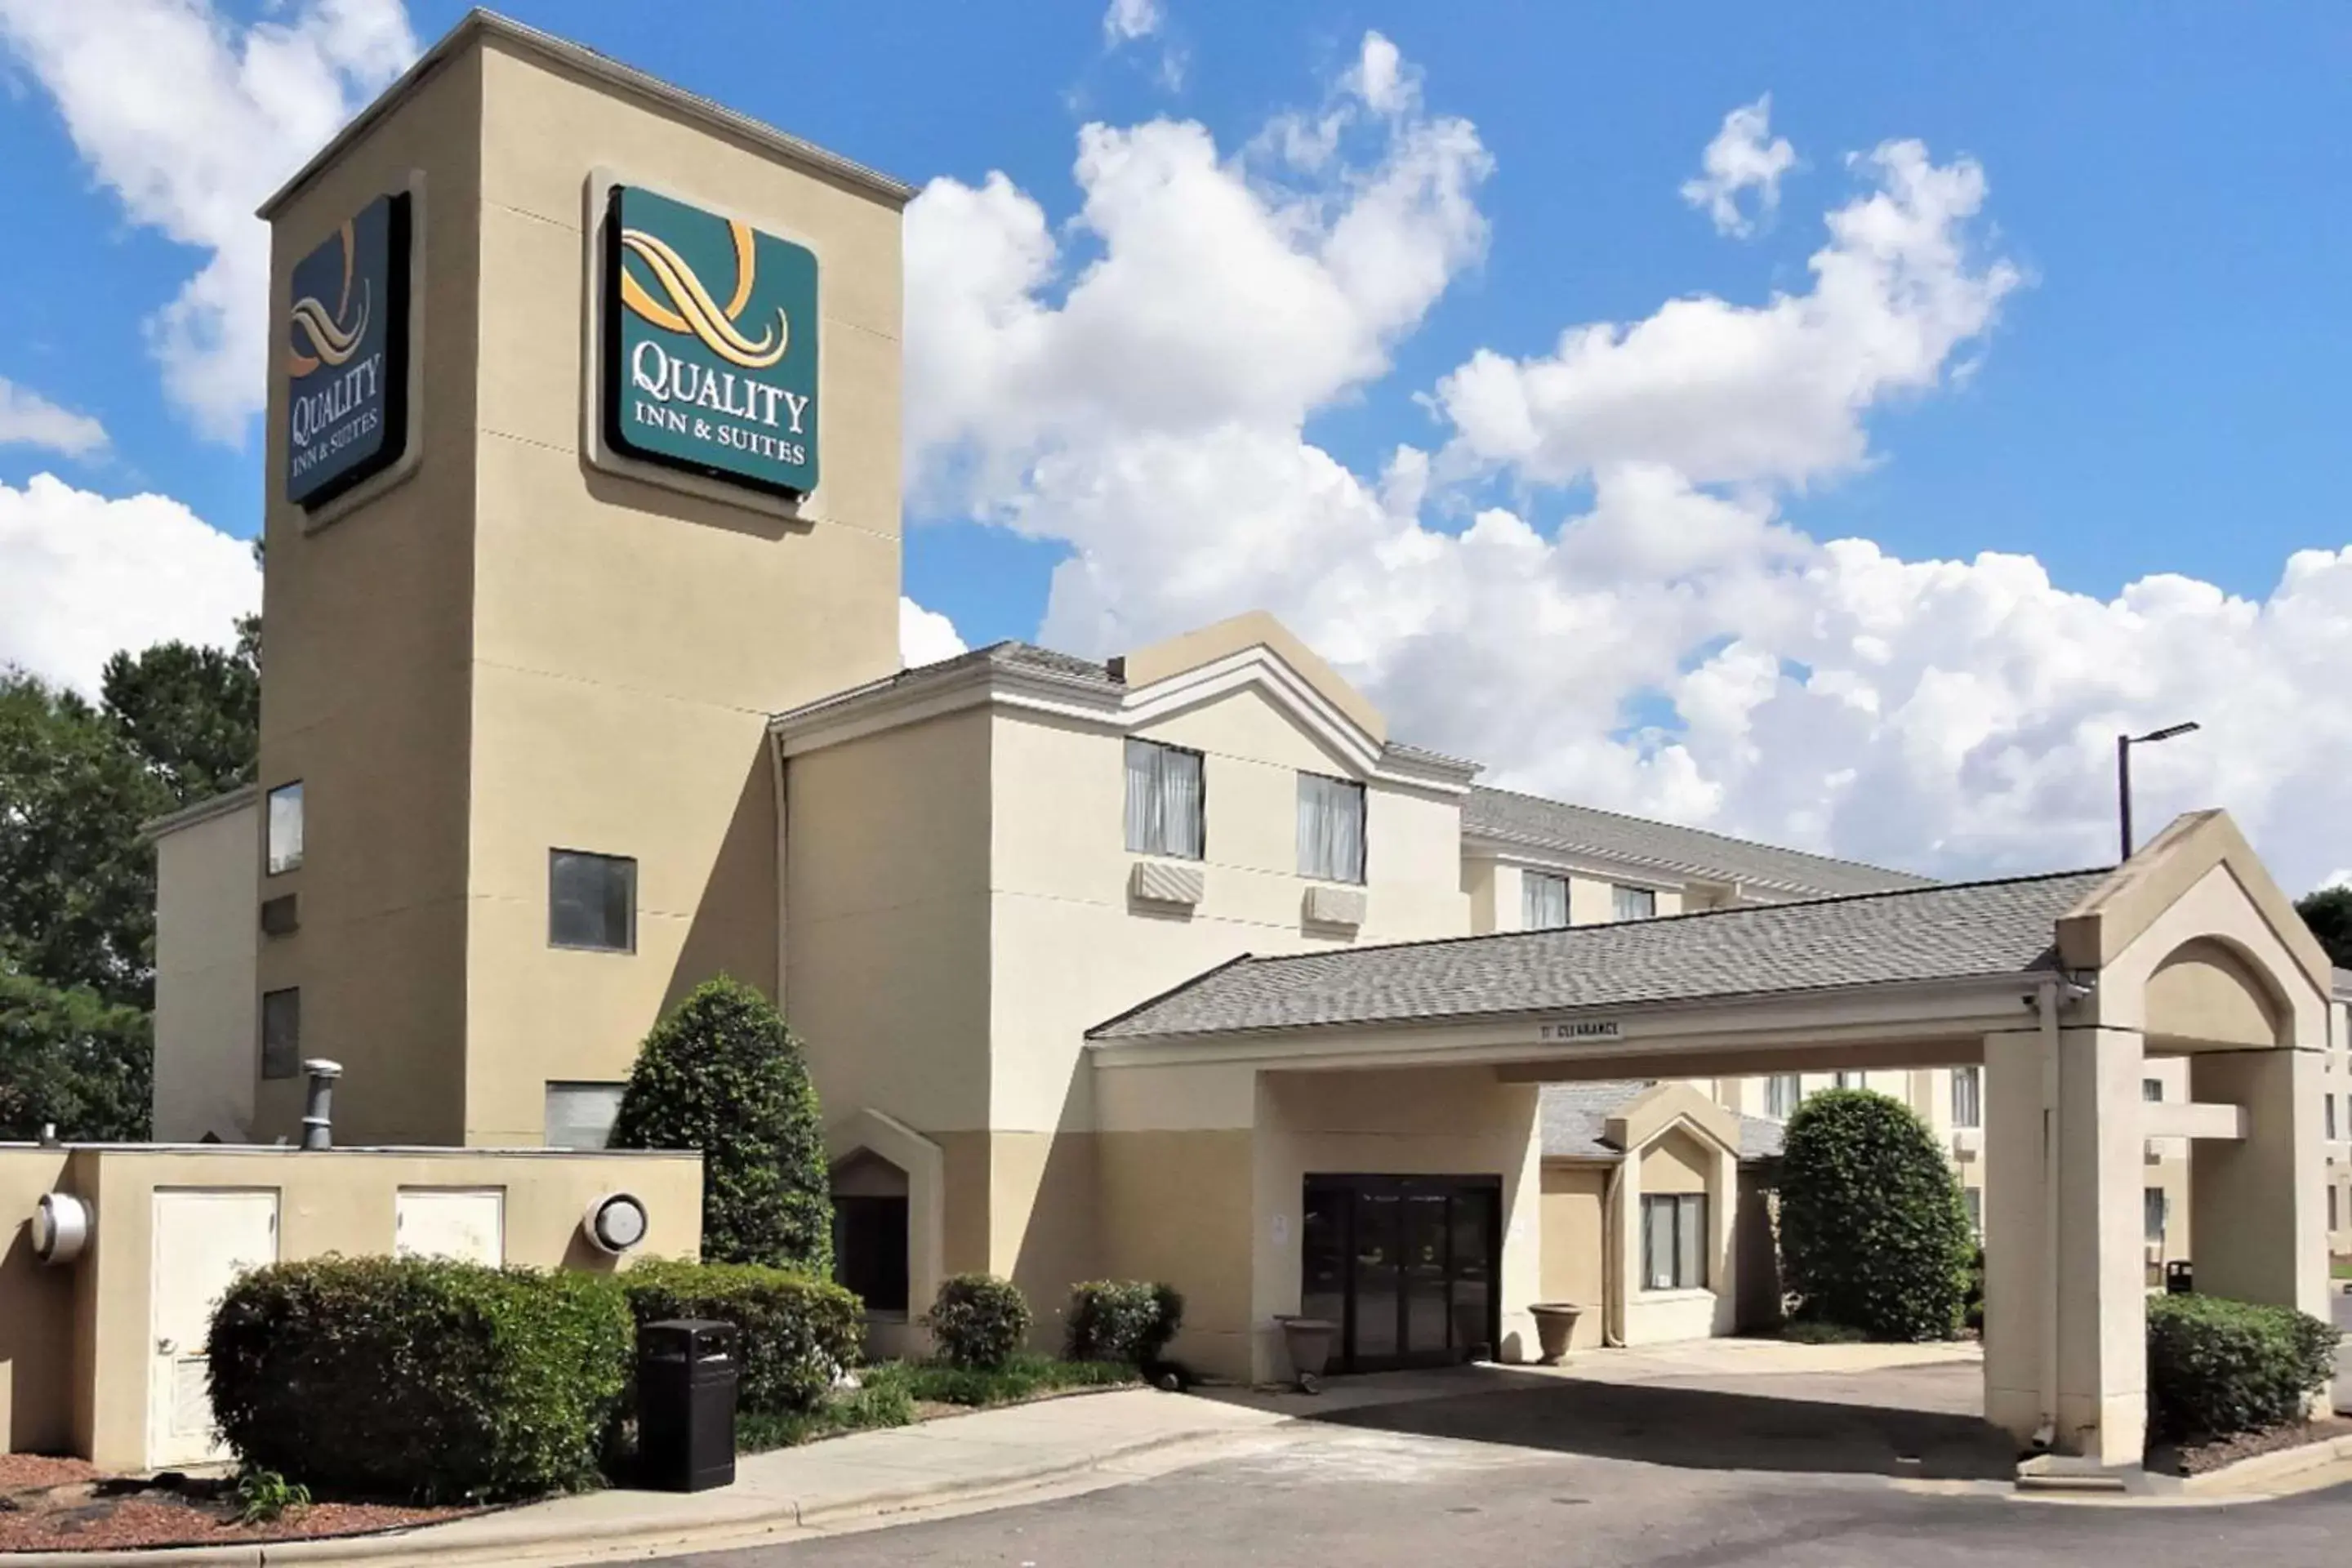 Property Building in Quality Inn & Suites Raleigh North Raleigh